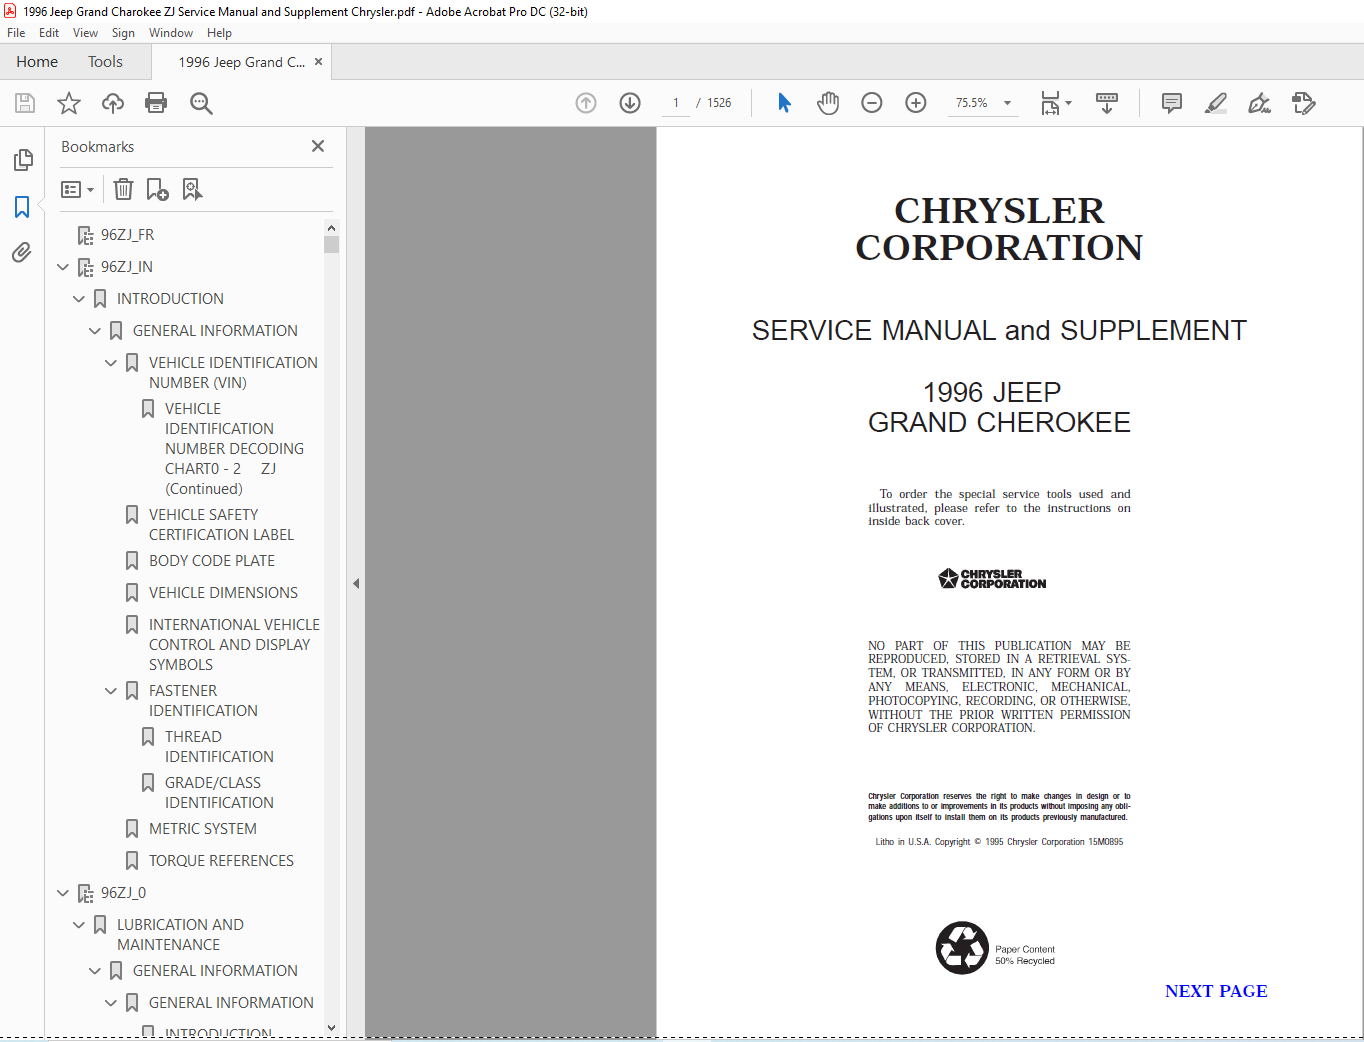 1996 jeep grand cherokee owners manual pdf free download free cracked software download